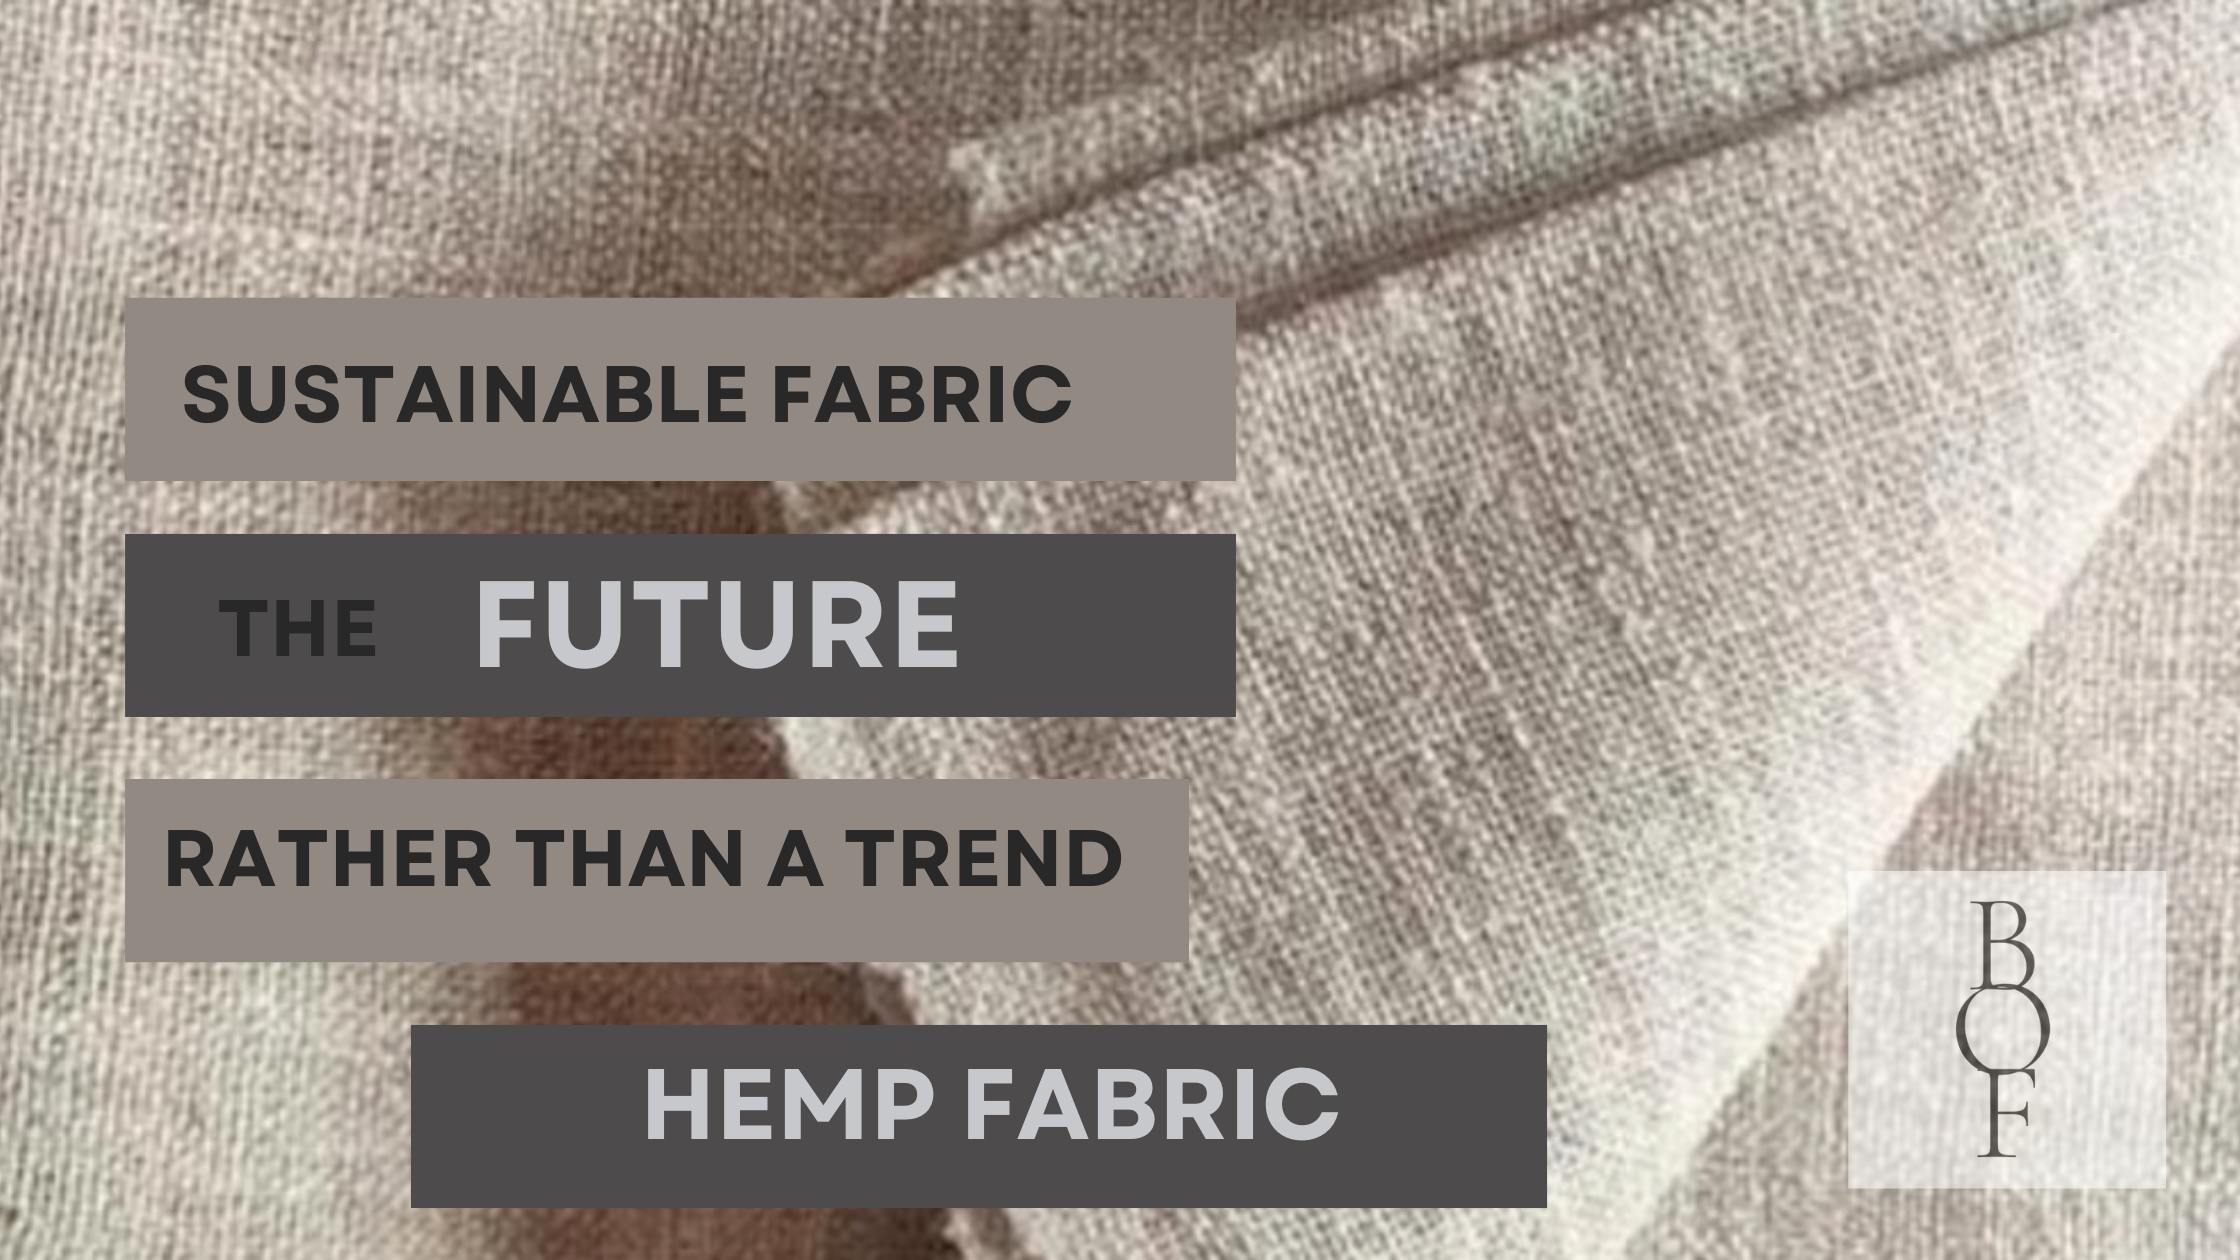 Hemp Fabric – Sustainable Fabric: What Is It and Why It Matters